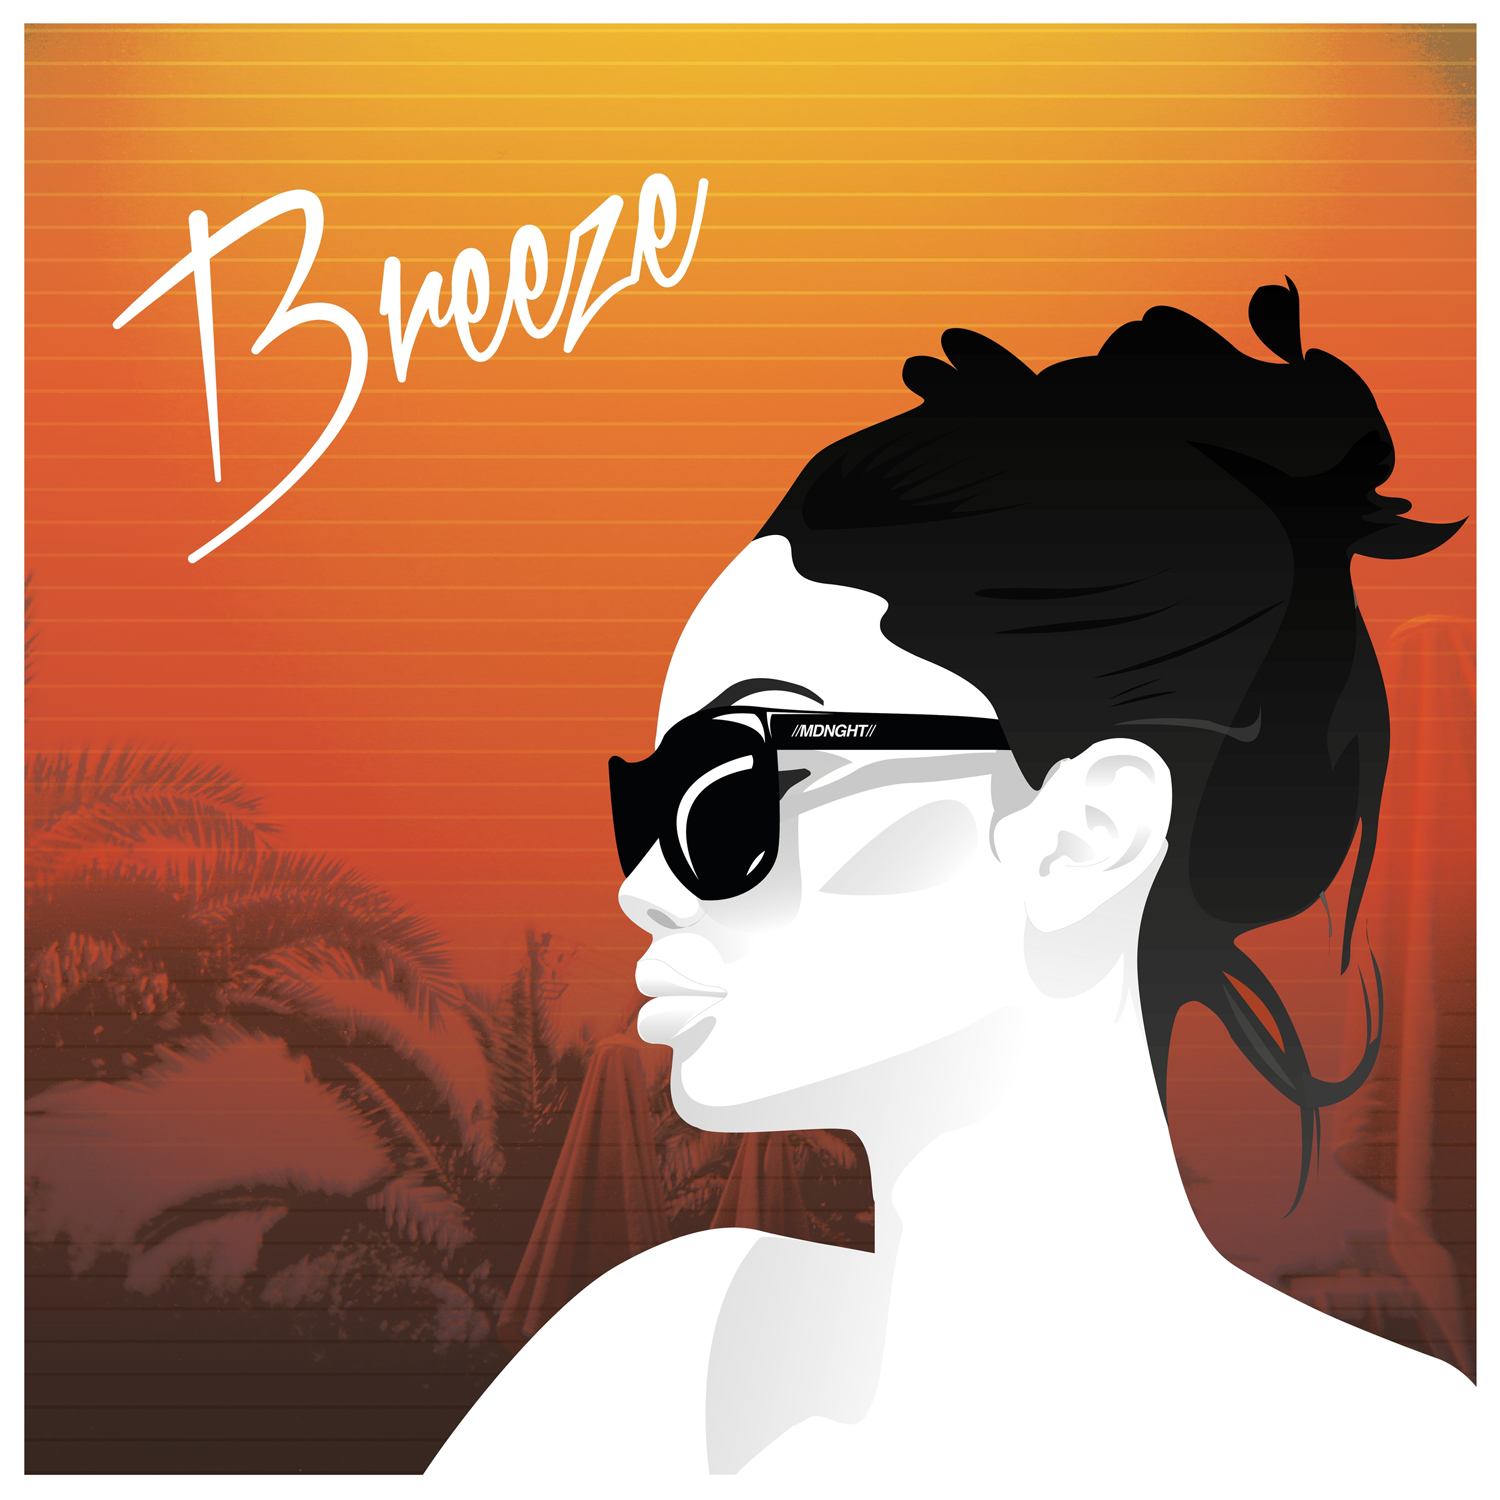 MDNGHT "Breeze" to be available in the U.S. 10/14/14